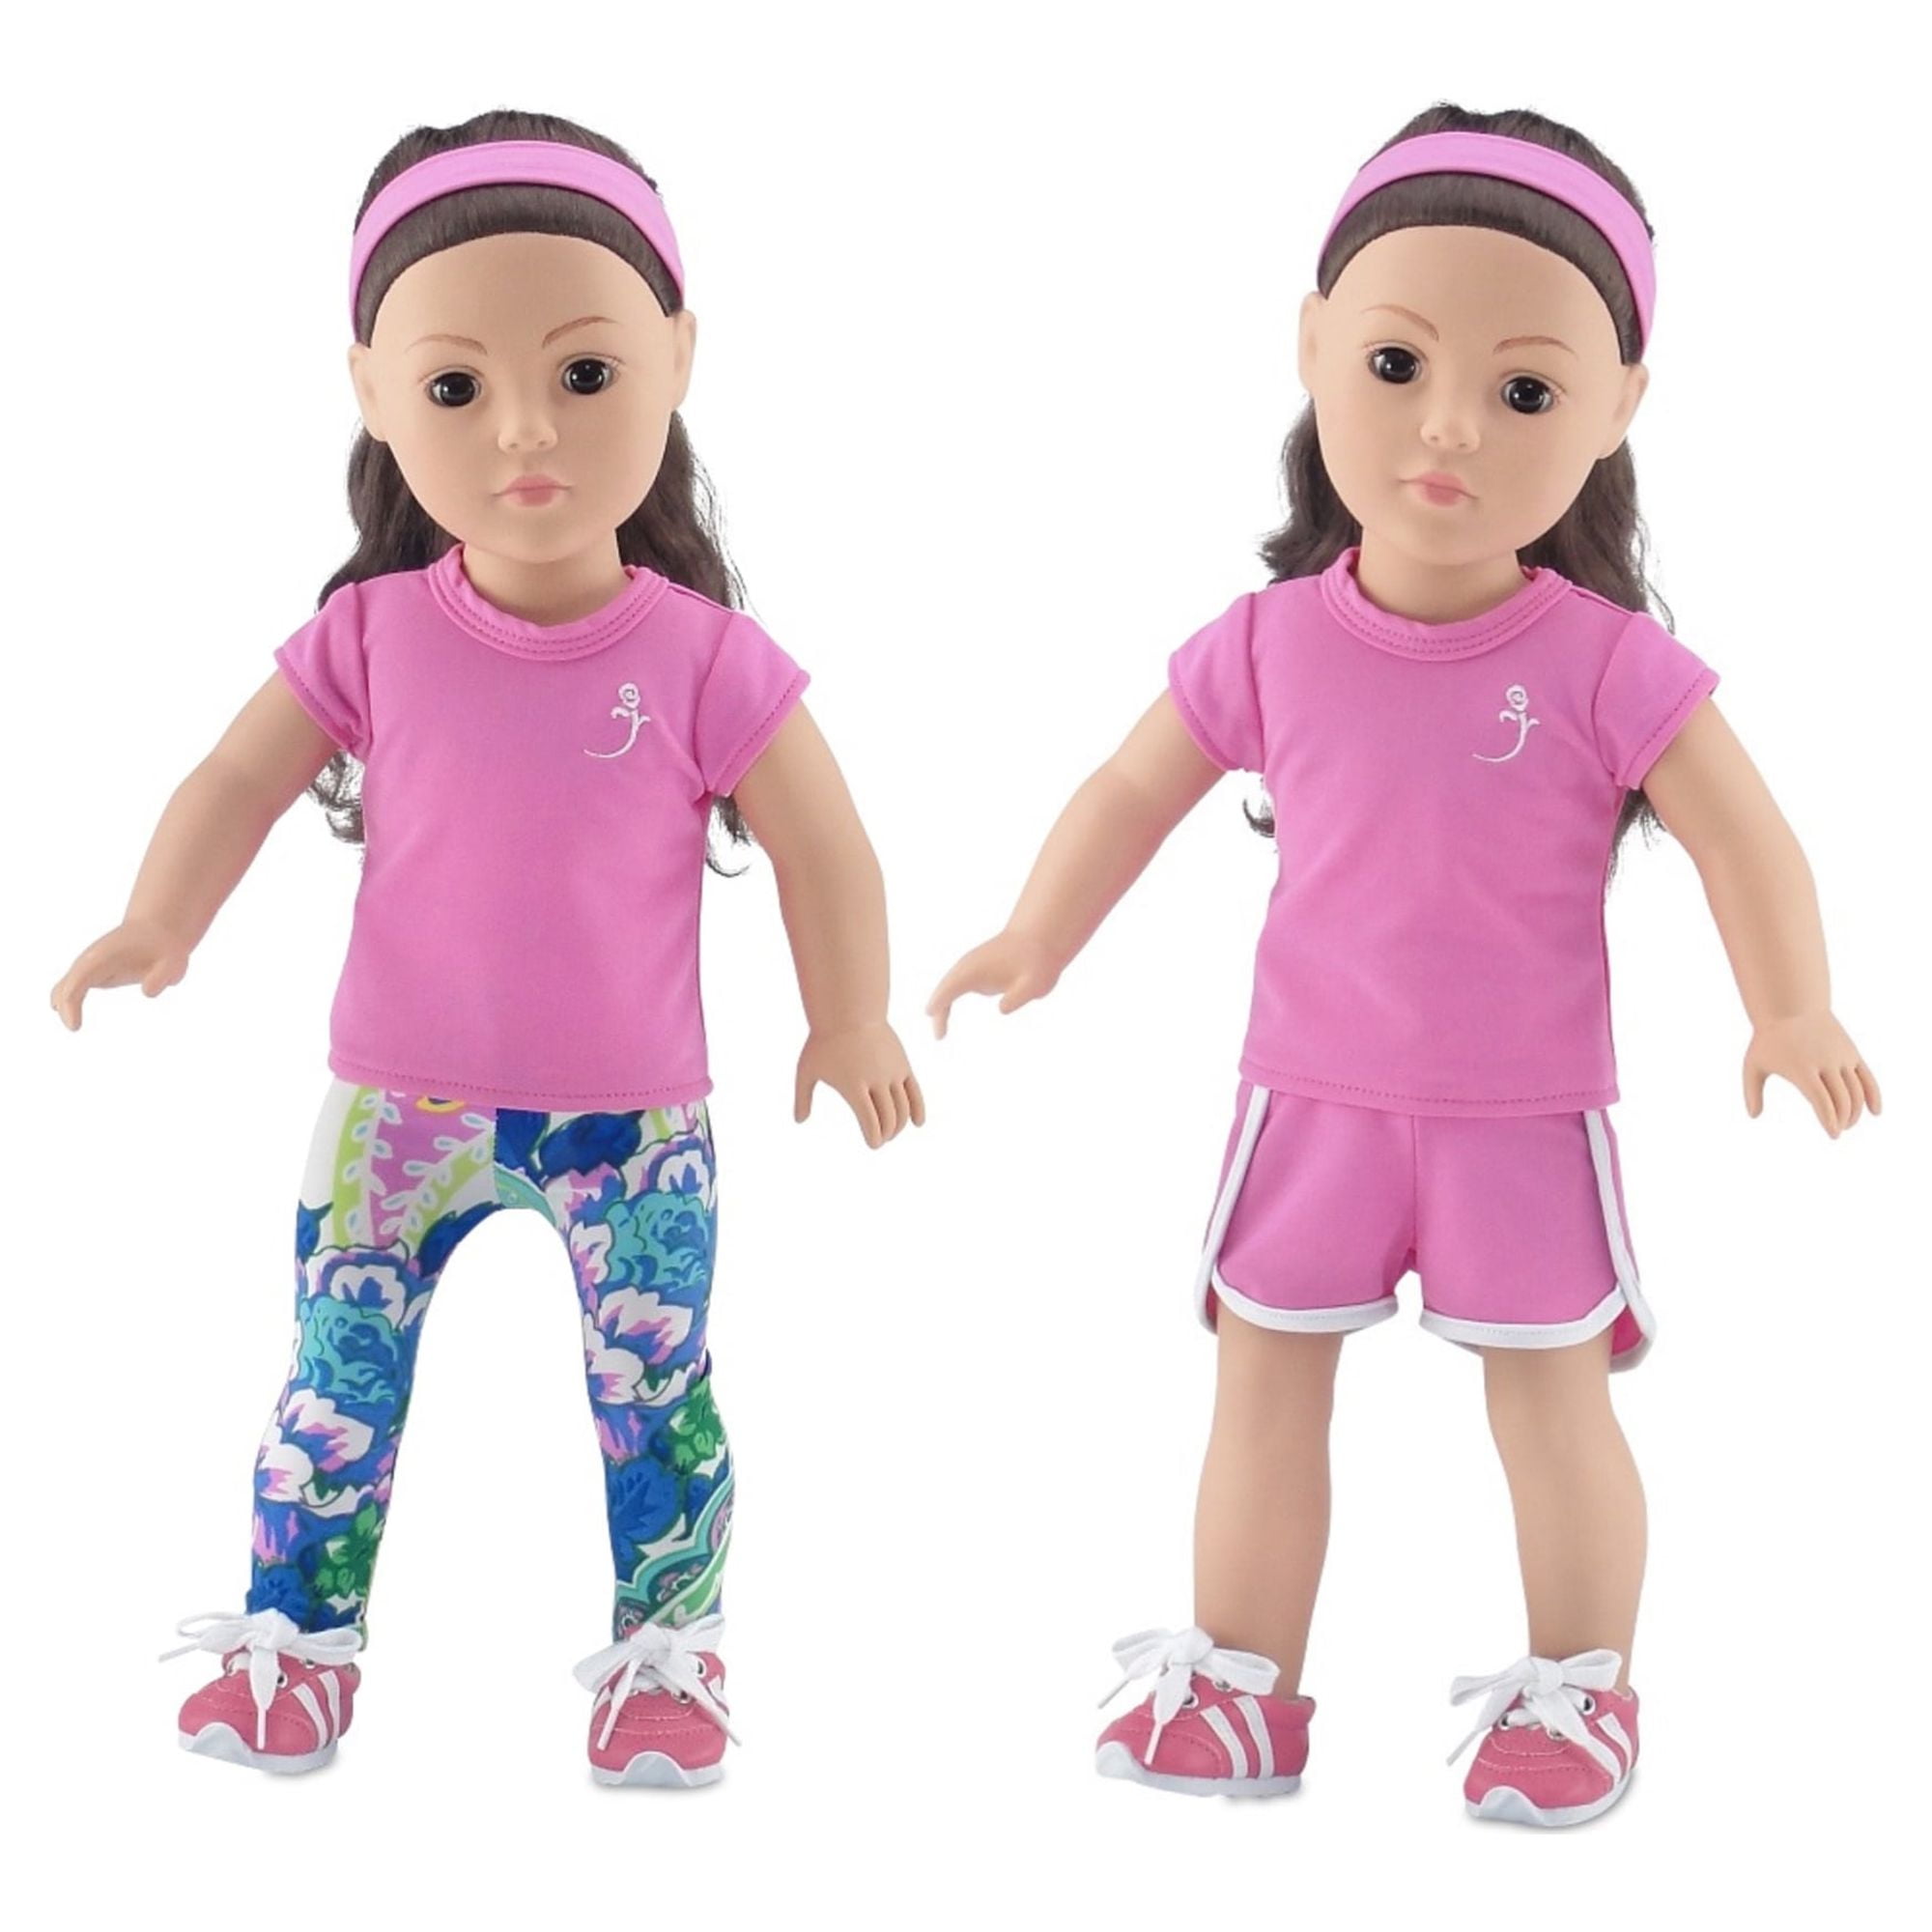 Emily Rose 18 Inch Doll 5 Piece Sports Exercise Yoga Running